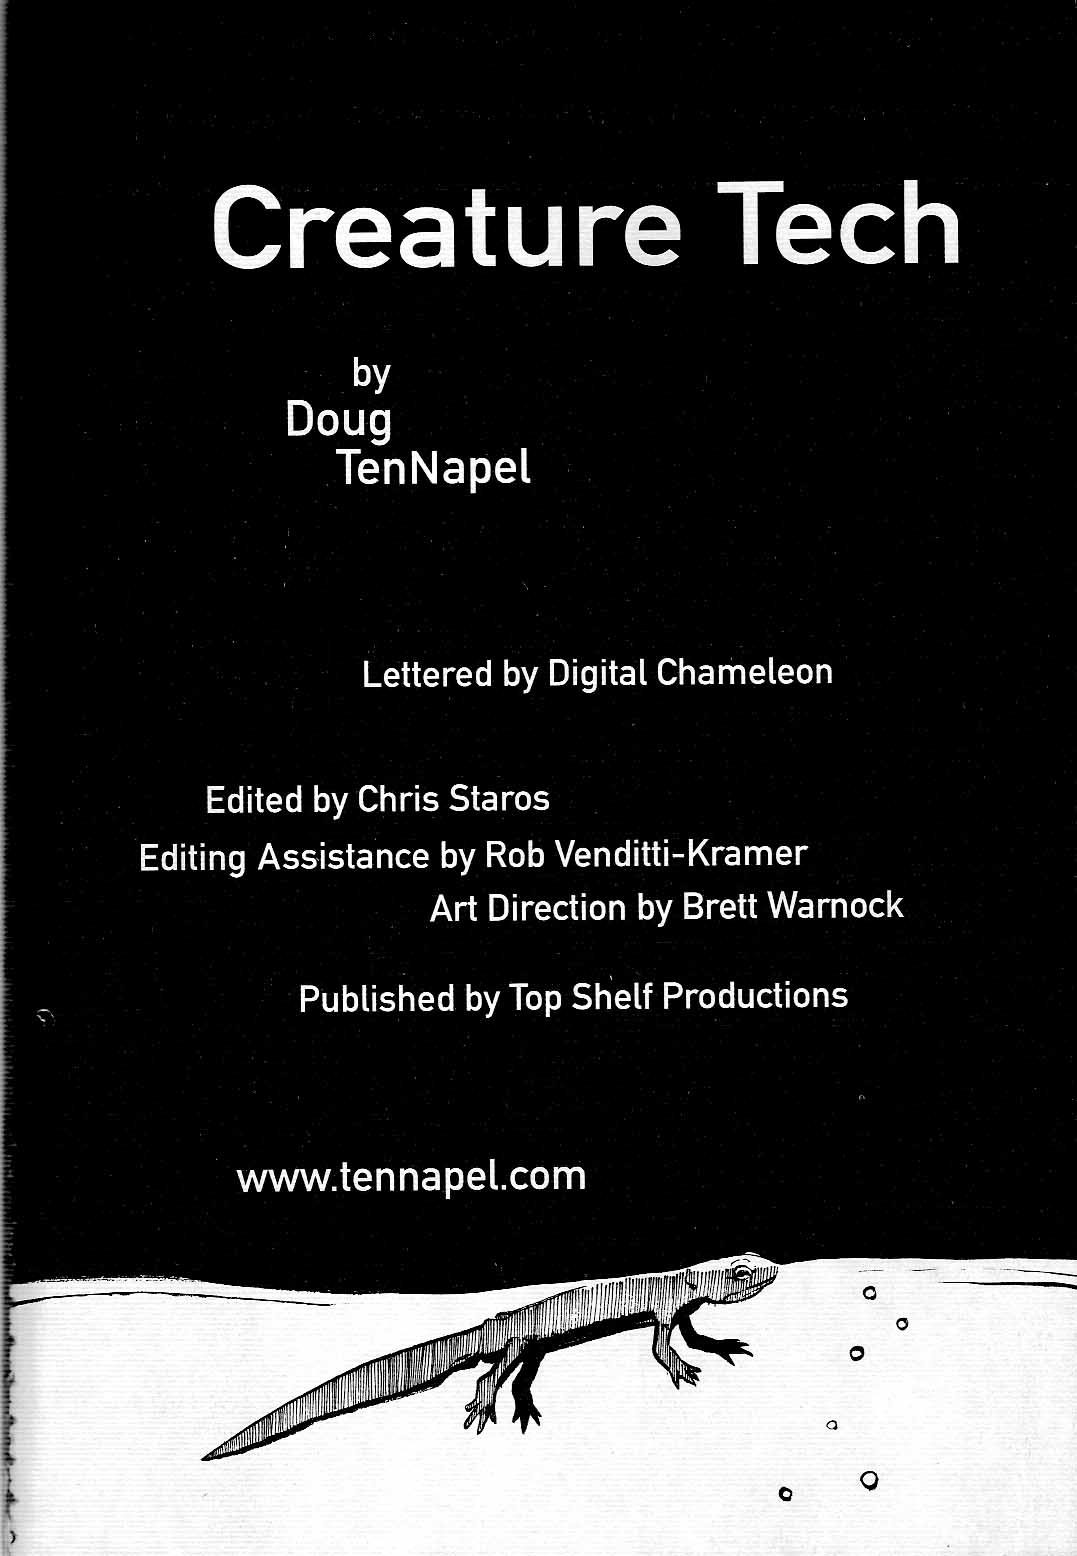 Read online Creature Tech comic -  Issue # TPB - 3